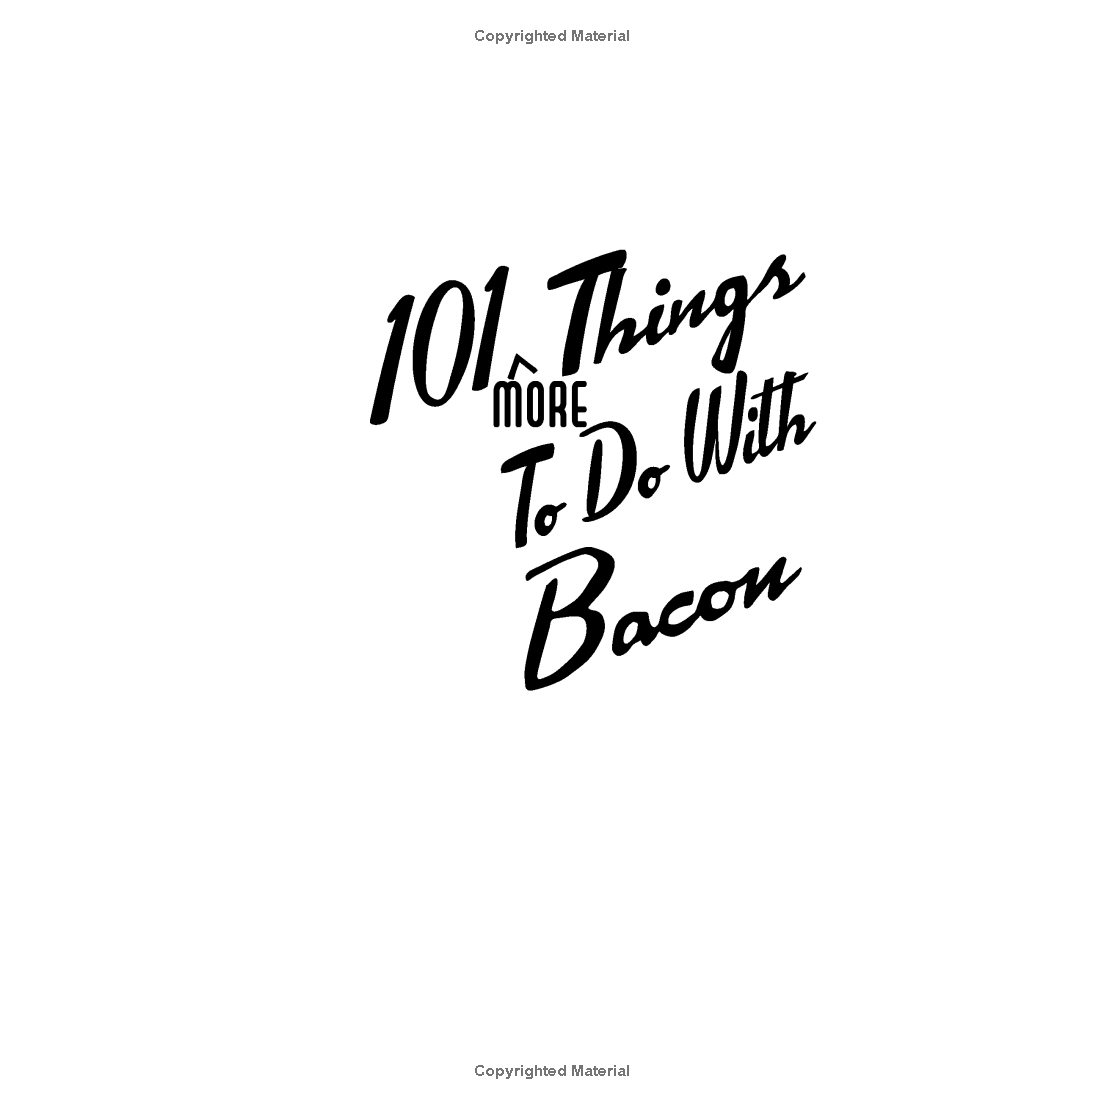 101 More Things To Do With Bacon by Eliza Cross